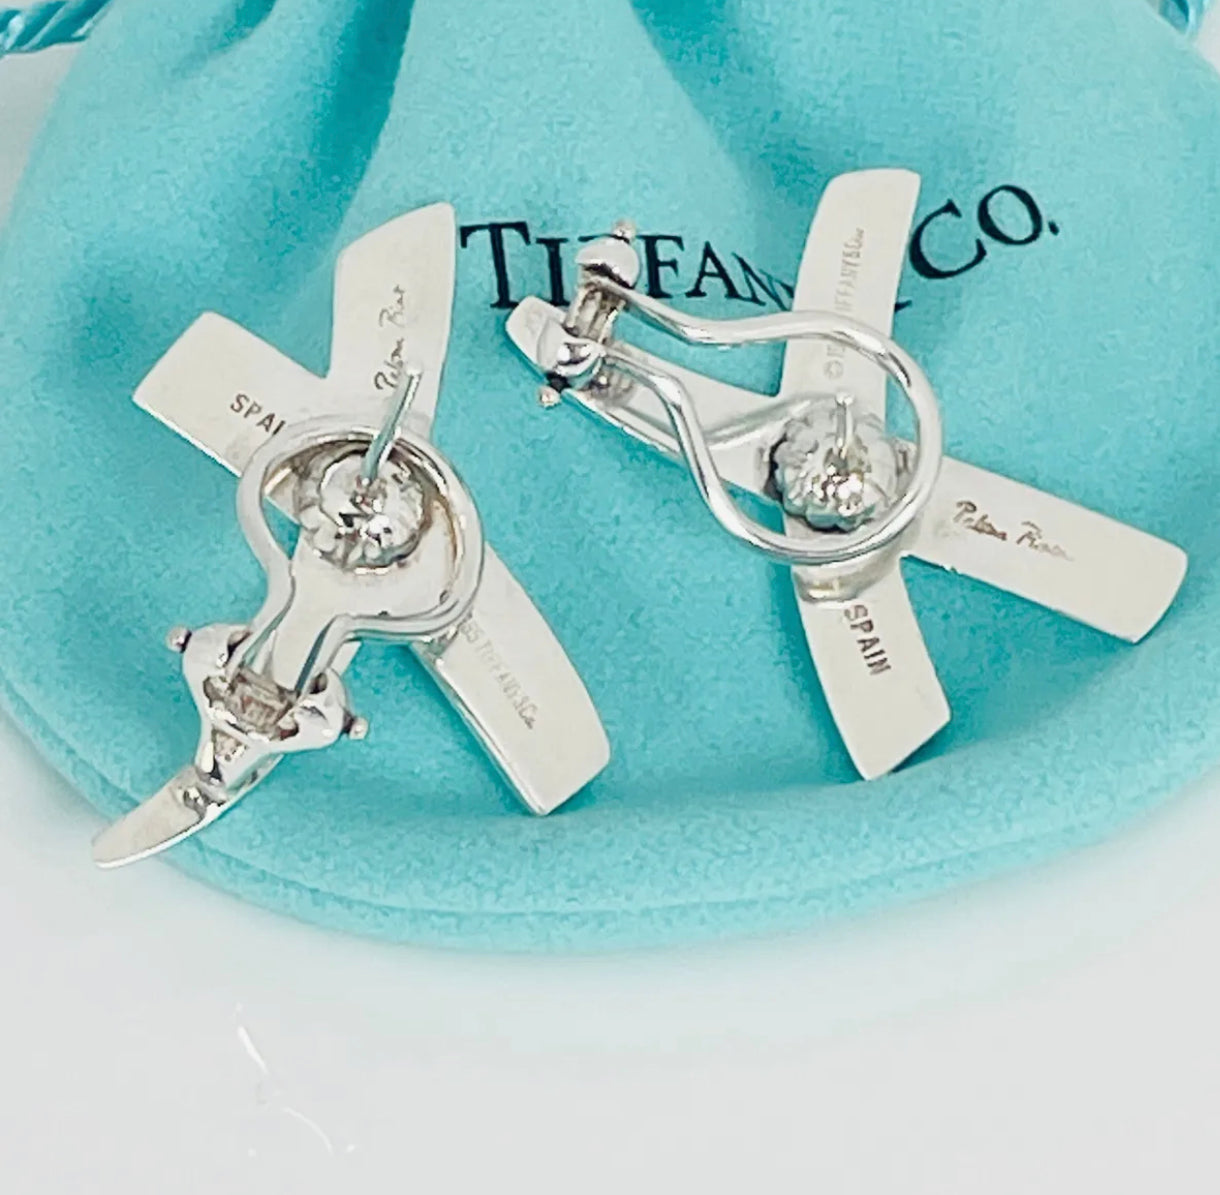 TIFFANY CO LARGE STERLING SILVER EARRINGS BY PALOMA PICASSO